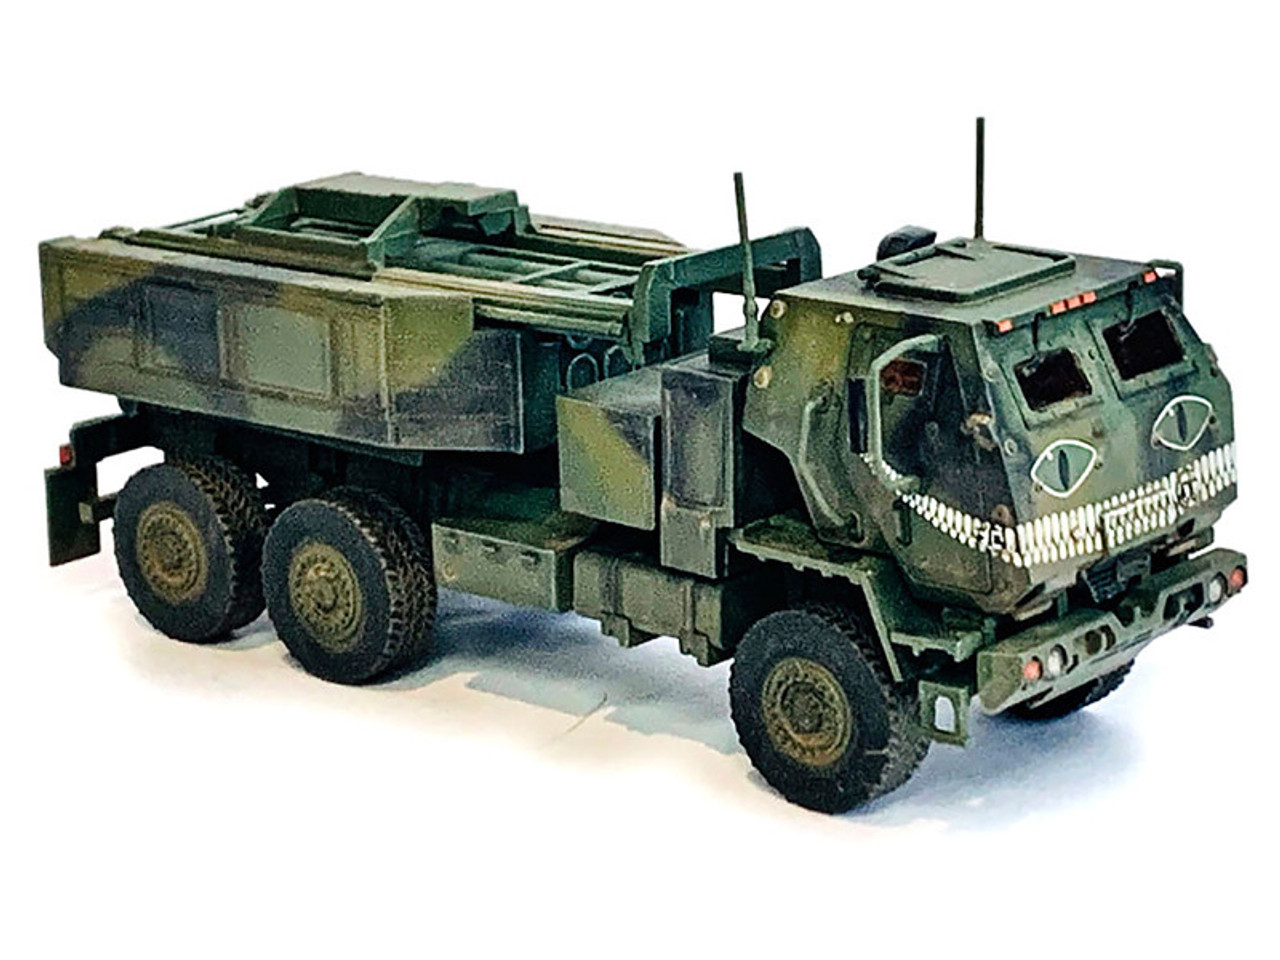 Ukraine M142 High Mobility Artillery Rocket System (HIMARS) Green Camouflage with Cat Face Graphic "NEO Dragon Armor" Series 1/72 Plastic Model by Dragon Models